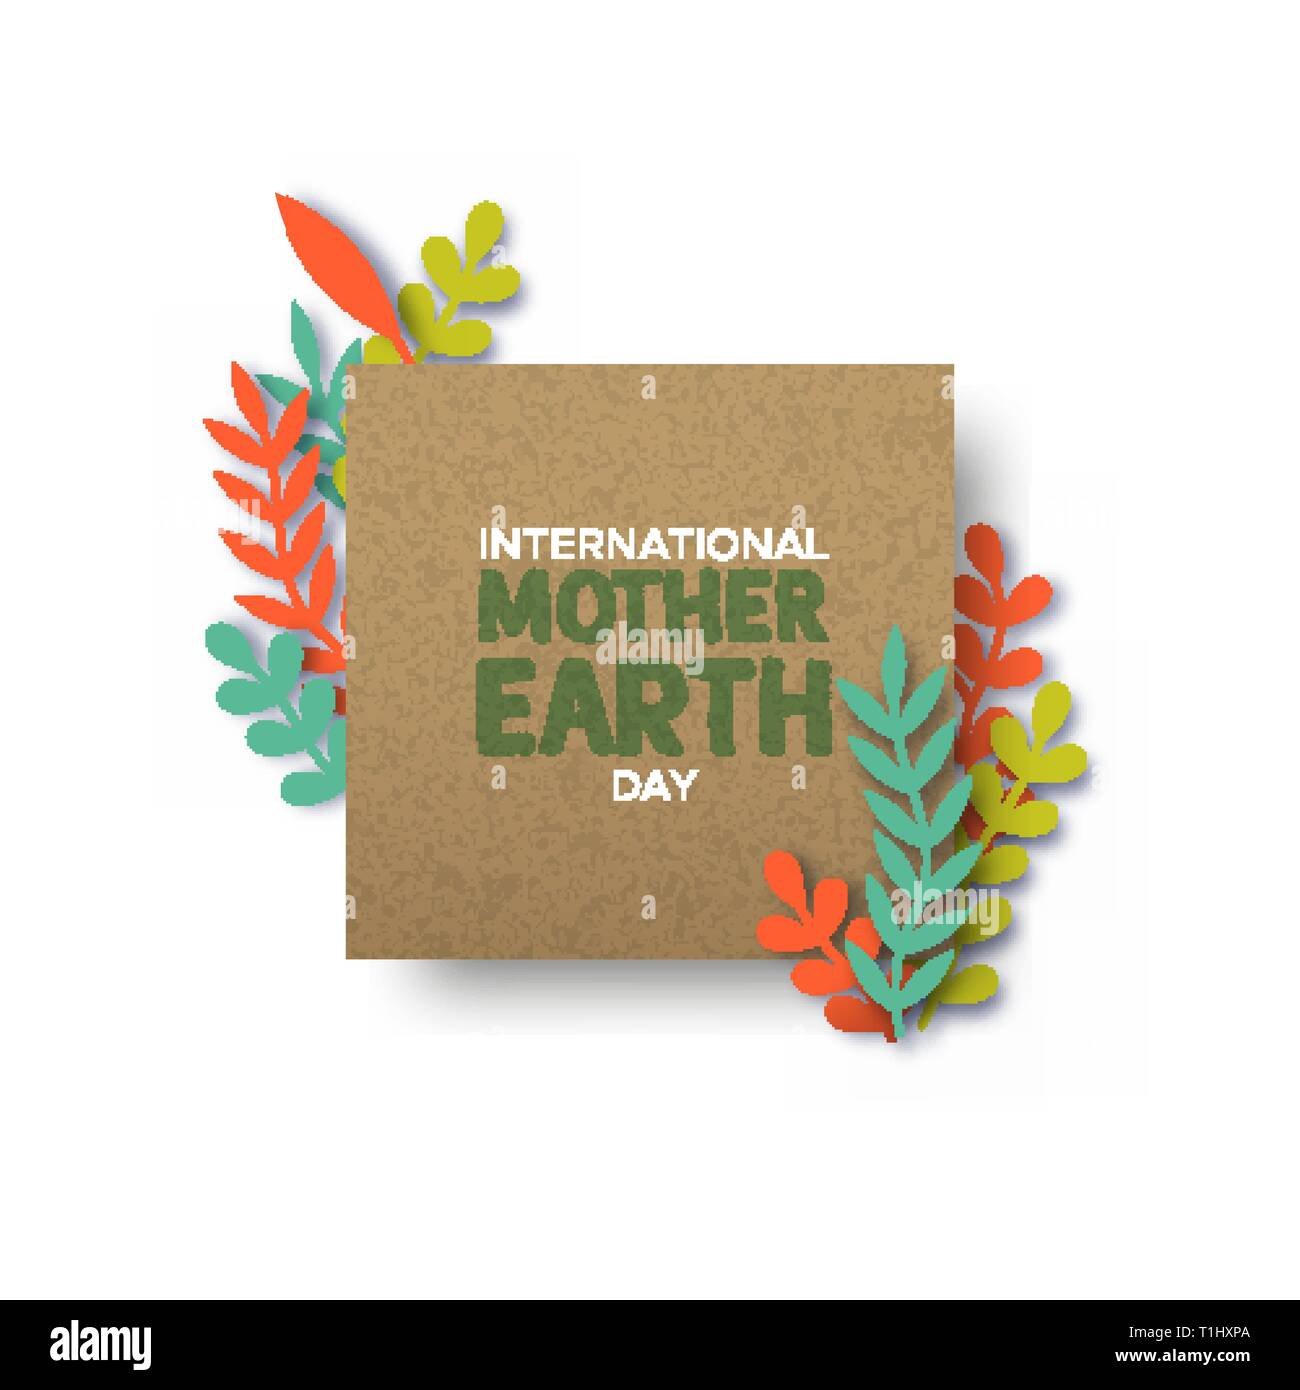 International Mother Earth Day illustration. Recycled paper frame on papercut color leaves for eco friendly concept. Stock Vector